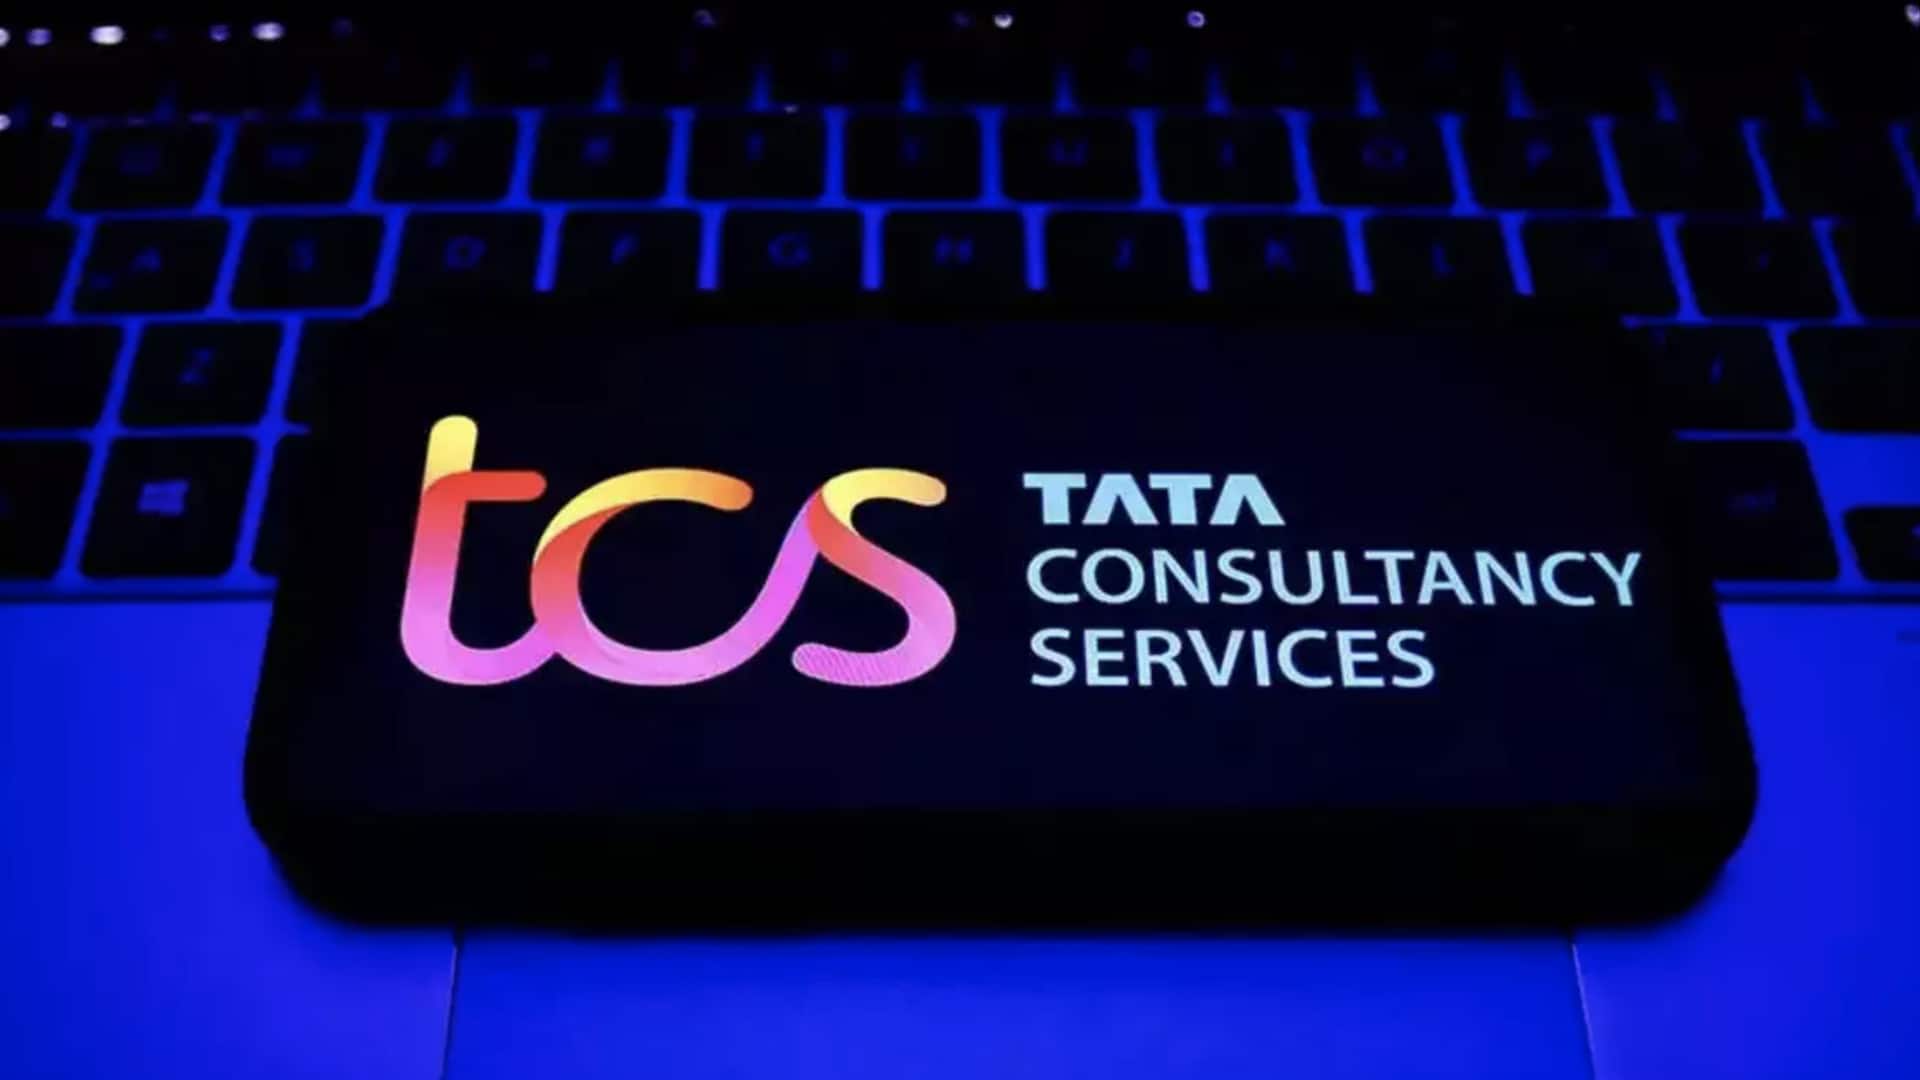 TCS replaces American techies with Indians on H-1B visa: Report